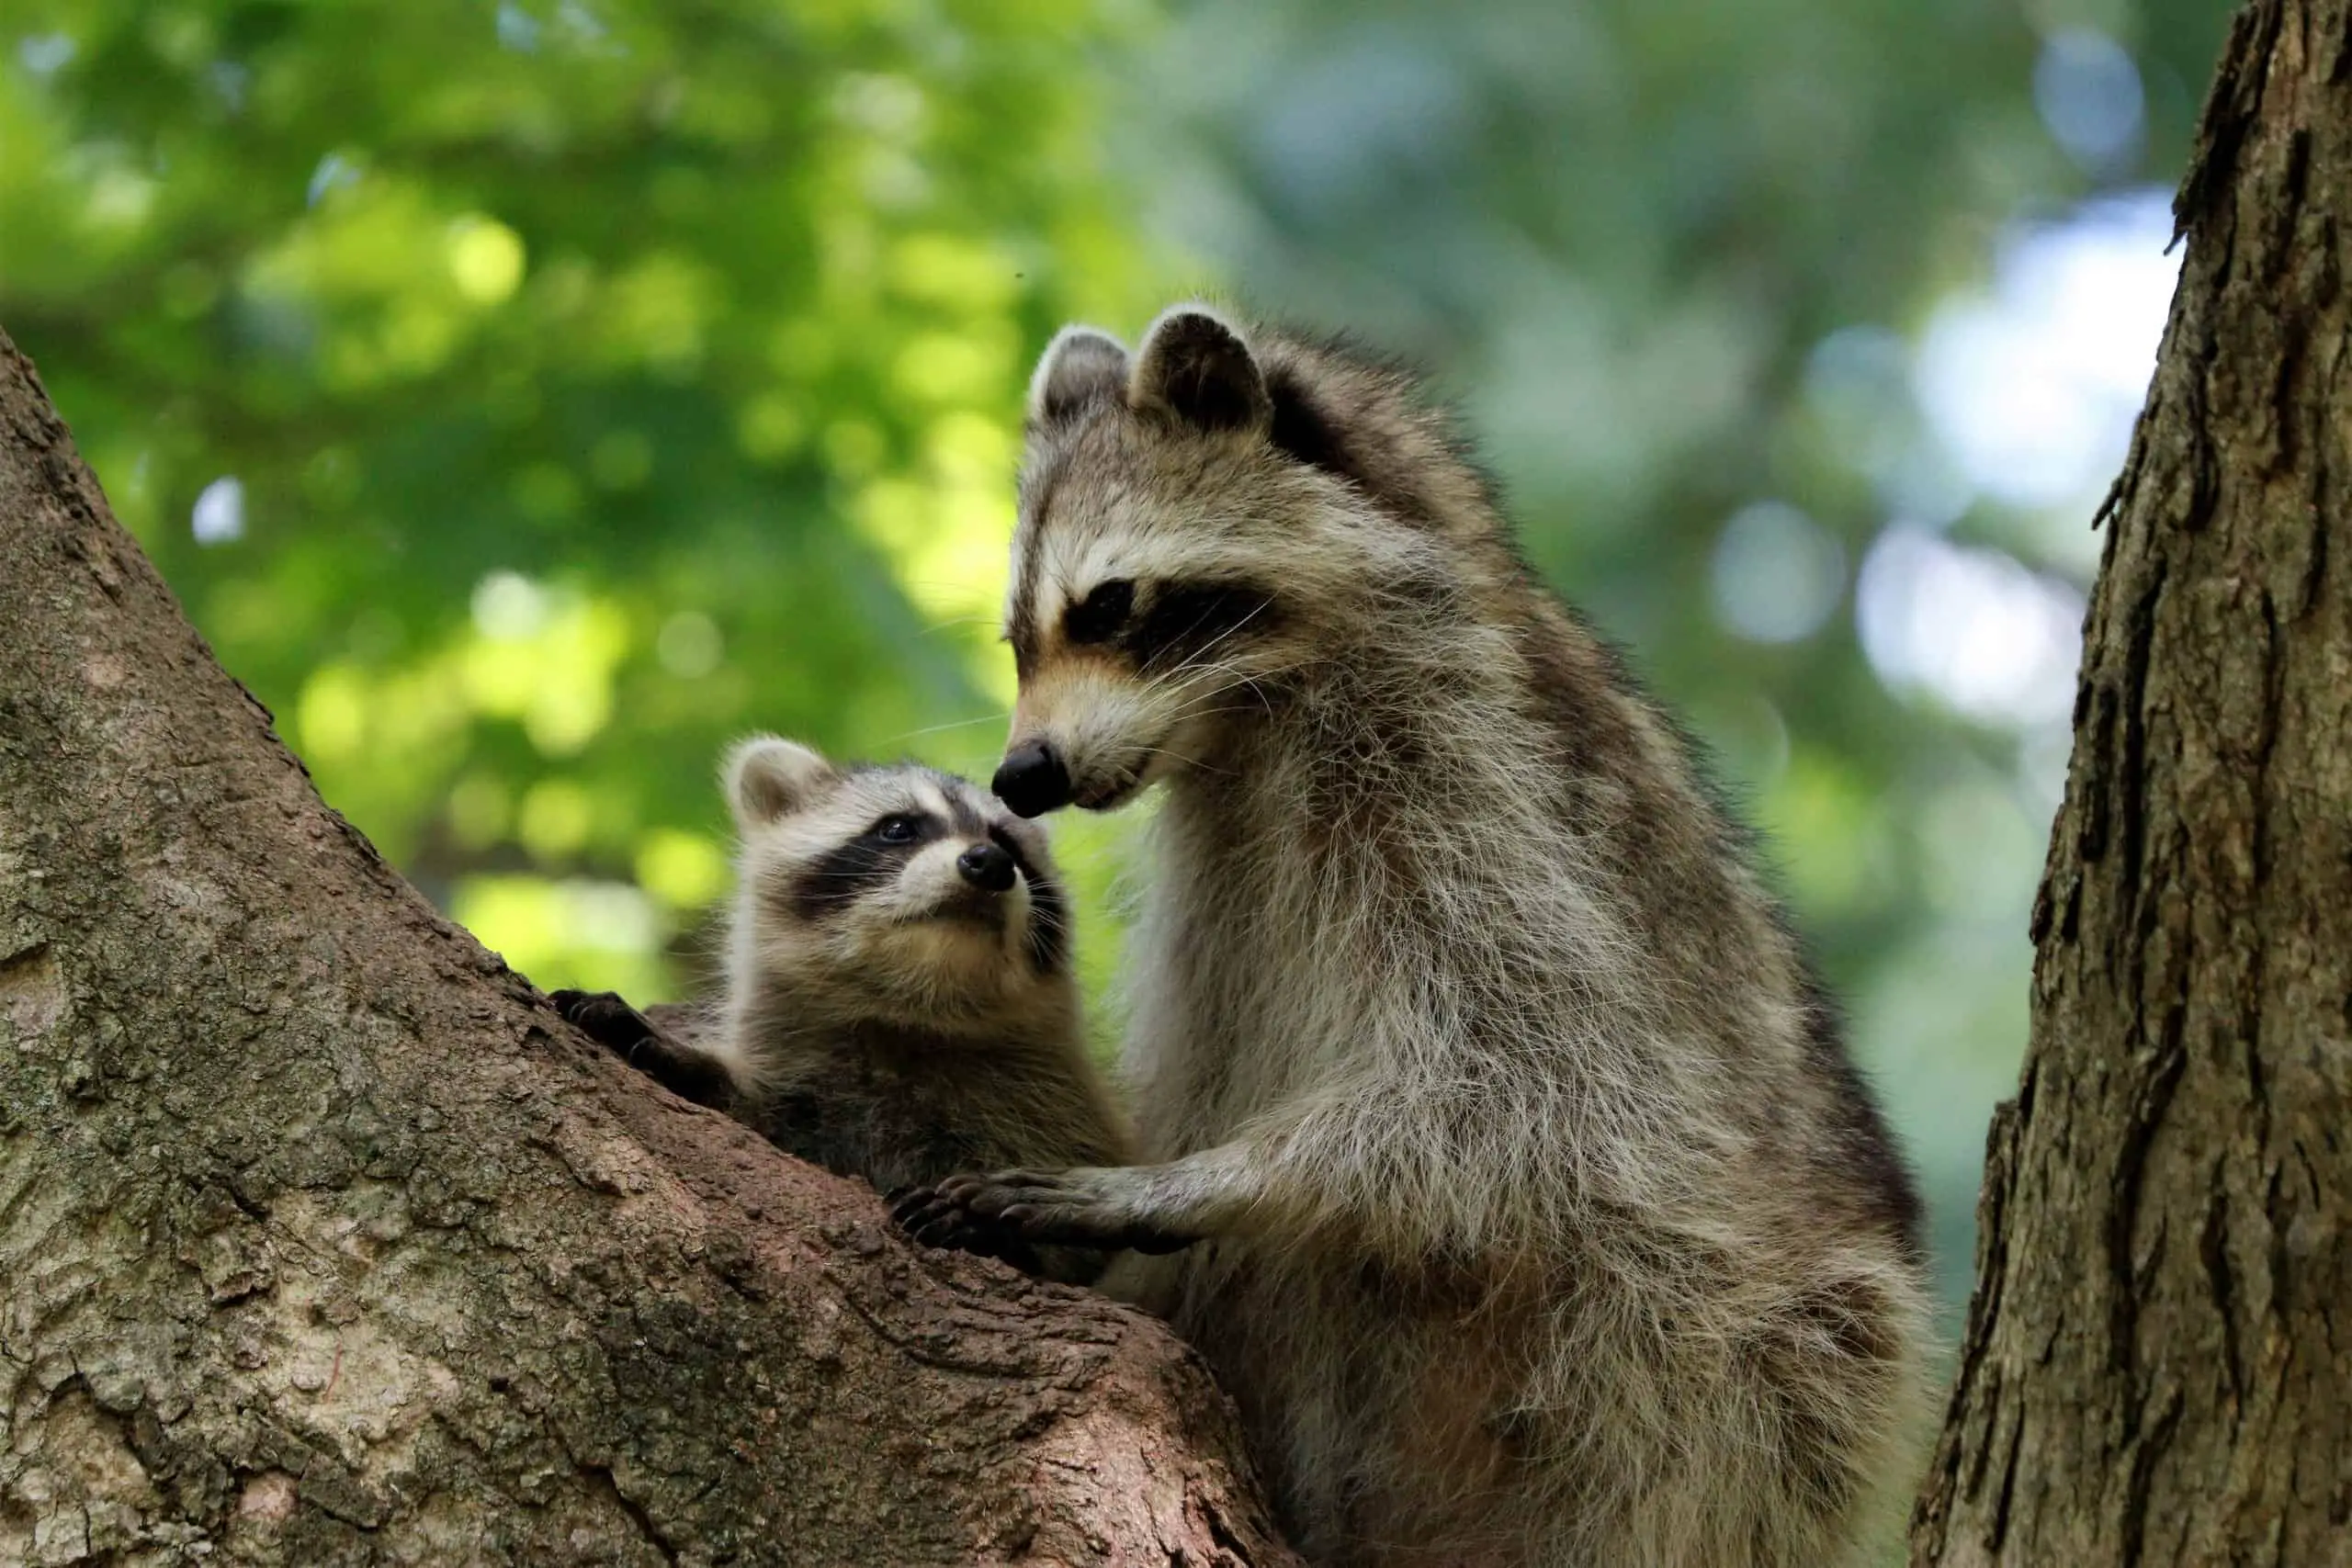 What Sounds Do Raccoons Make When They Mate?